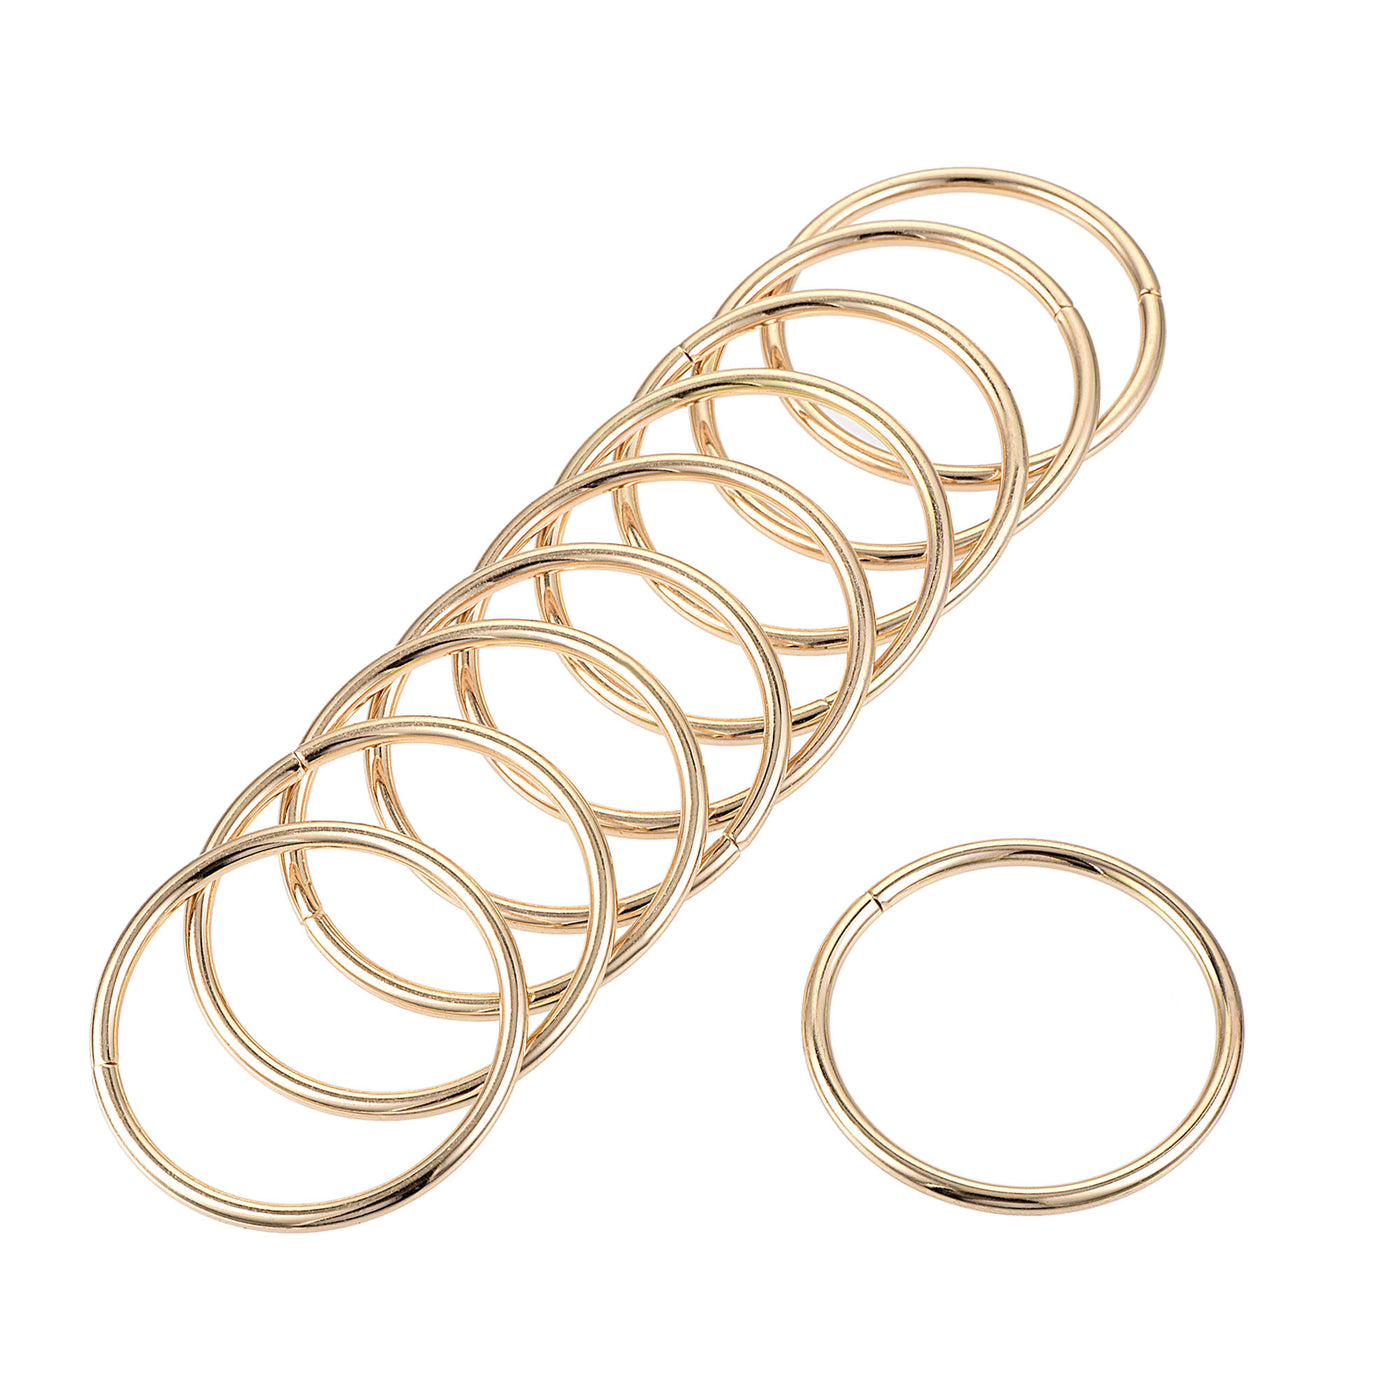 uxcell Uxcell 40mm Metal O Rings Non-Welded for Straps Bags Belts DIY Gold Tone 20pcs